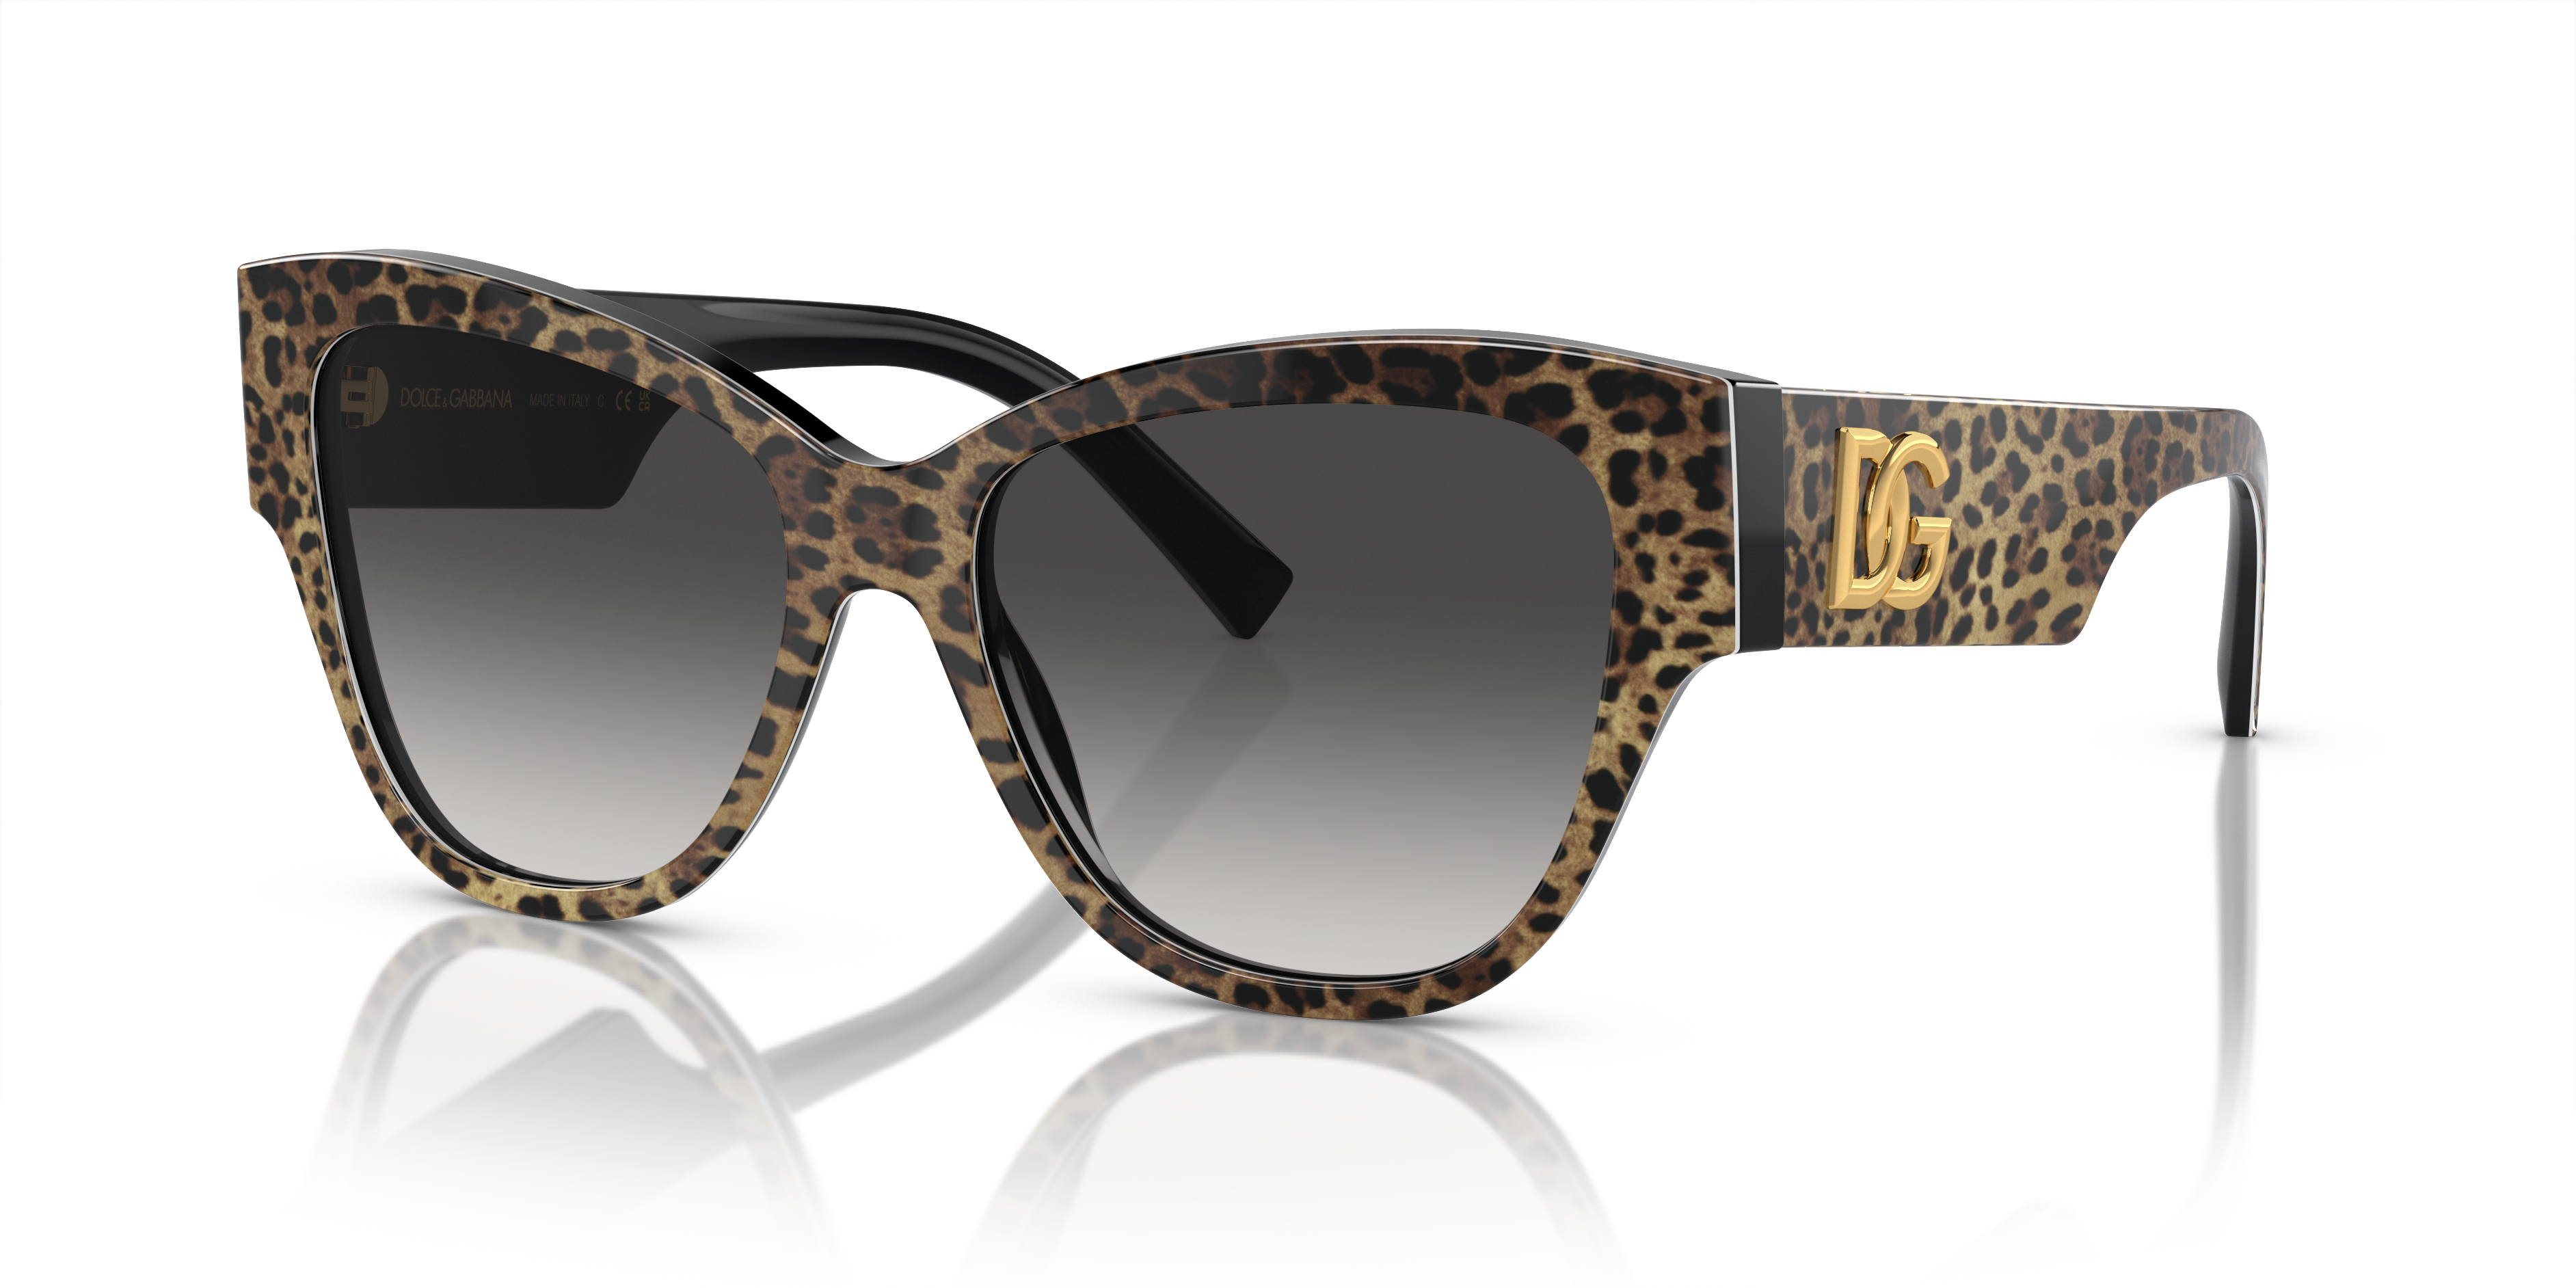 [products.image.angle_left01] DOLCE & GABBANA DG4449 31638G